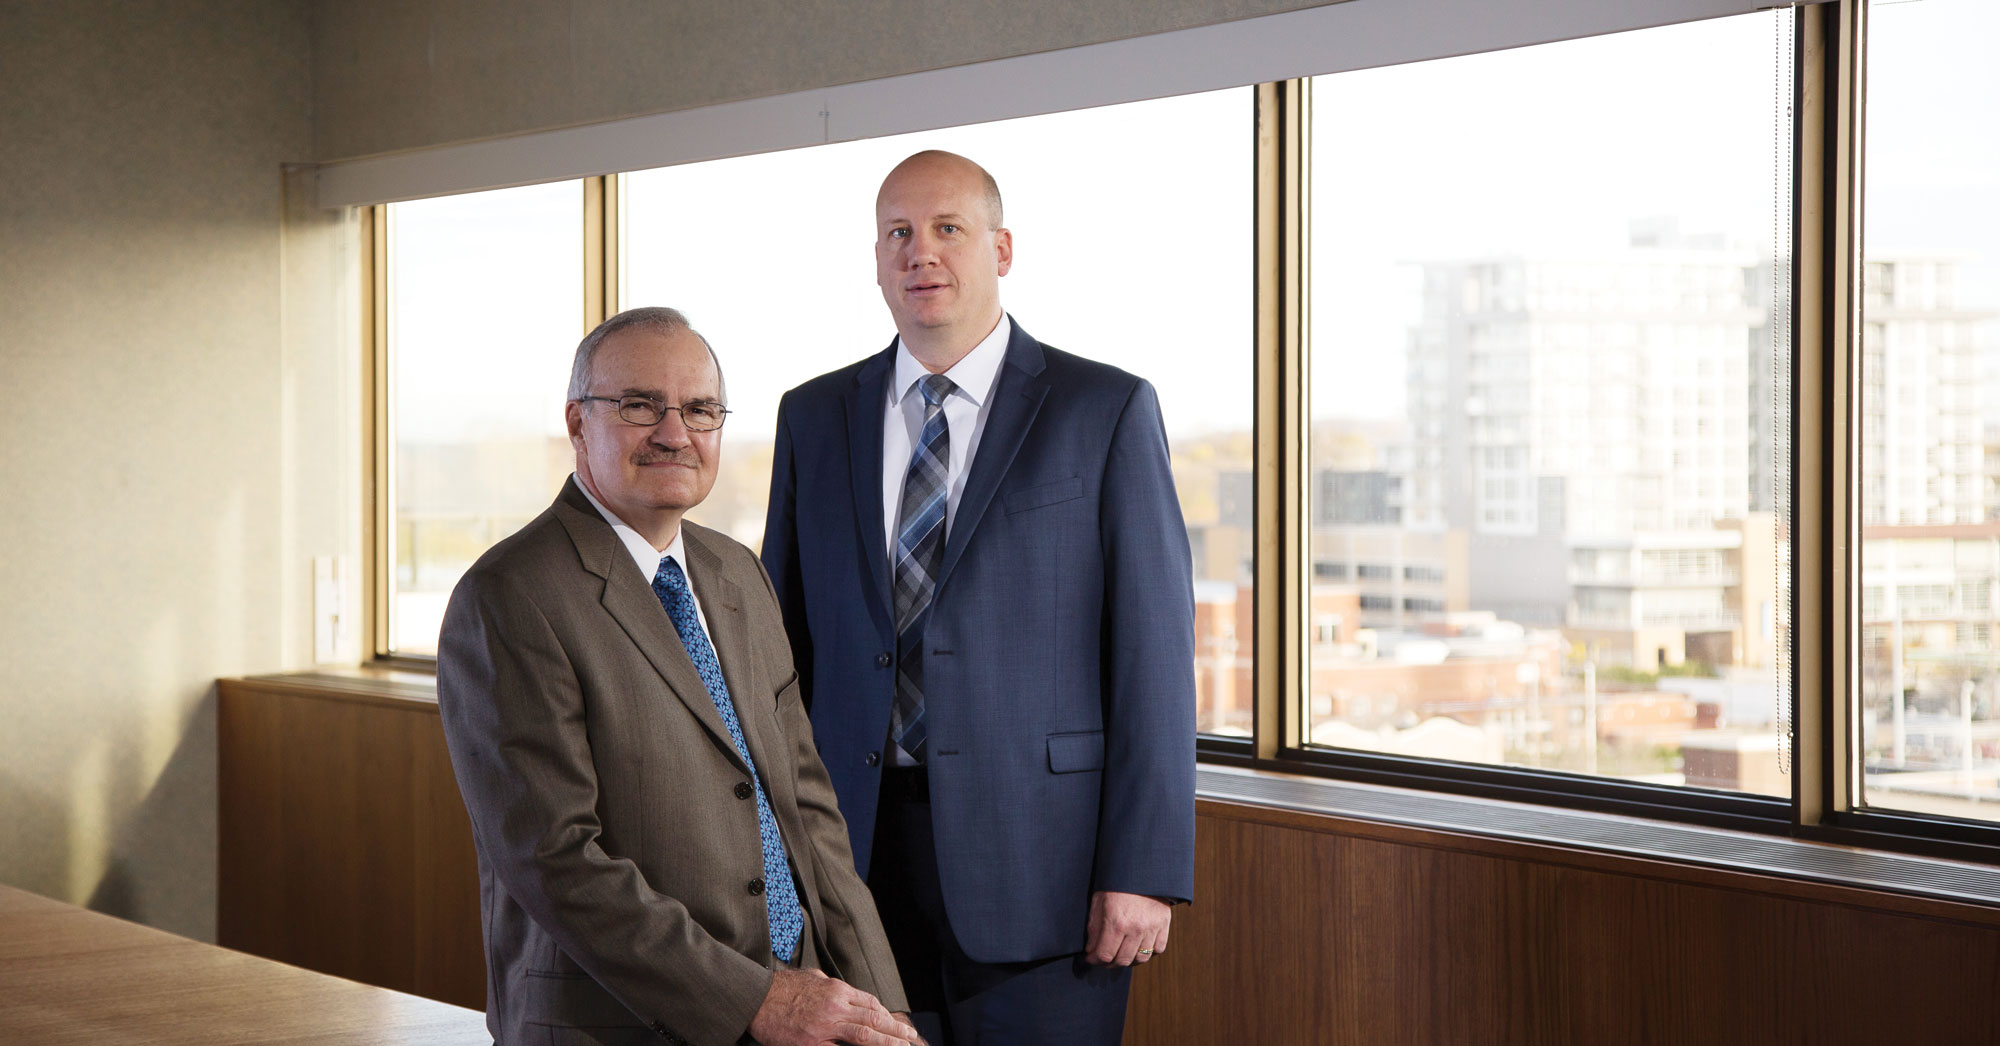 Gary J. Wolter, MGE Energy Chairman, with new MGE President and CEO, Jeffrey M. Keebler